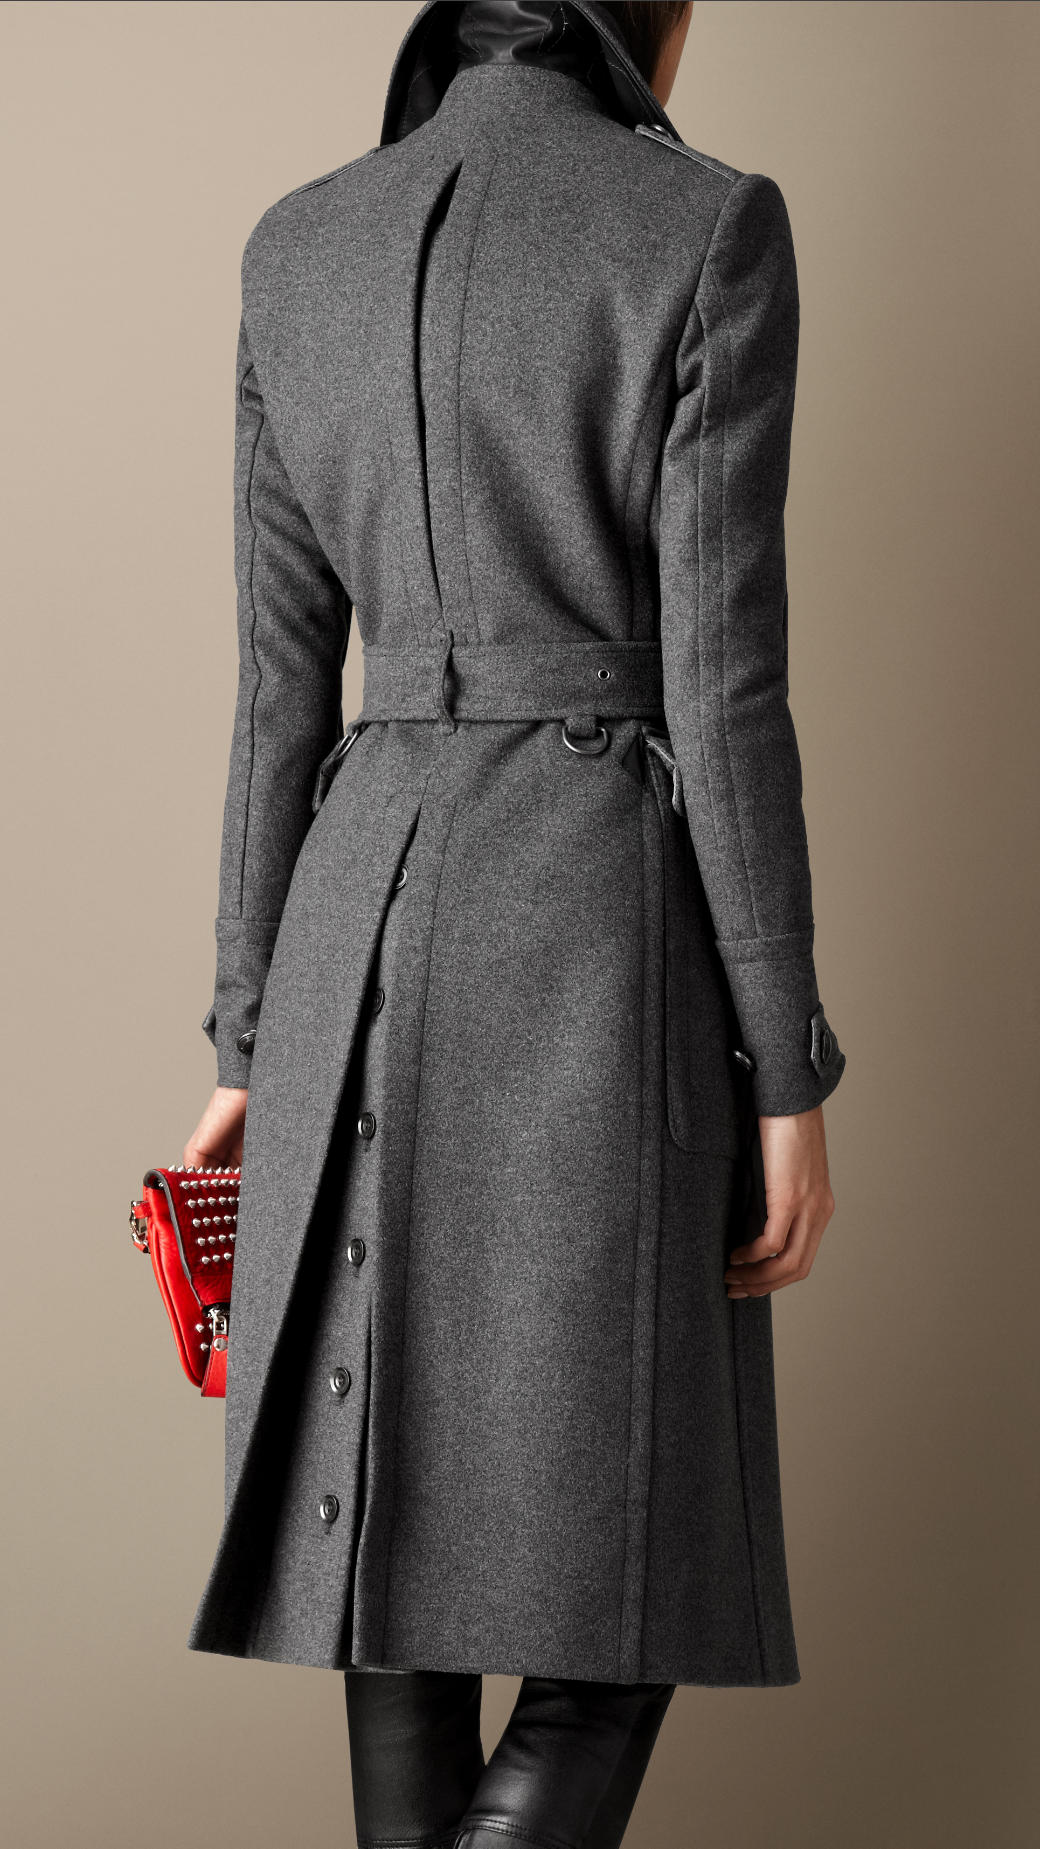 Lyst - Burberry Wool Cashmere Melton Military Coat in Gray